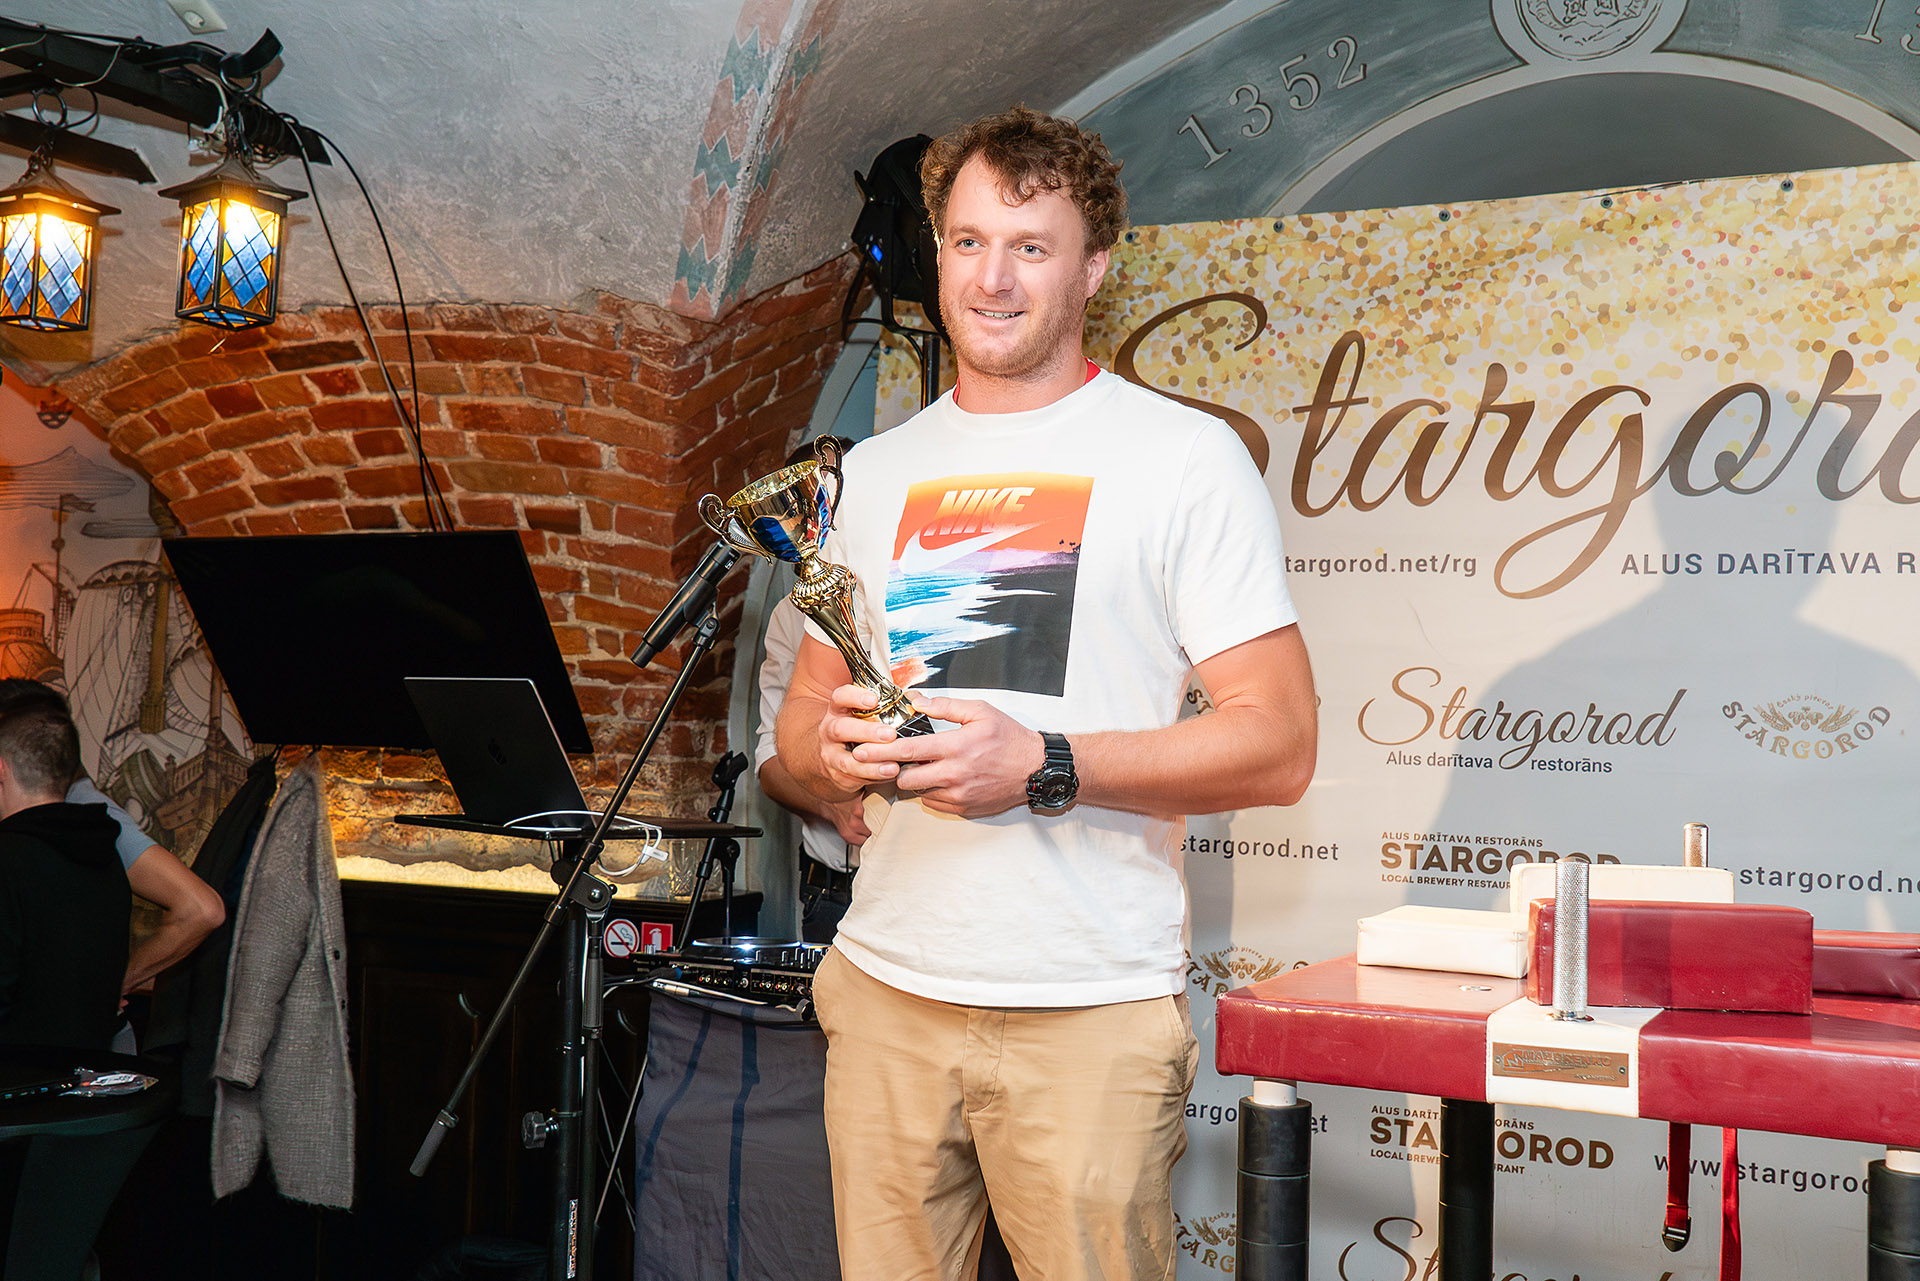 Welcome party at Stargorod